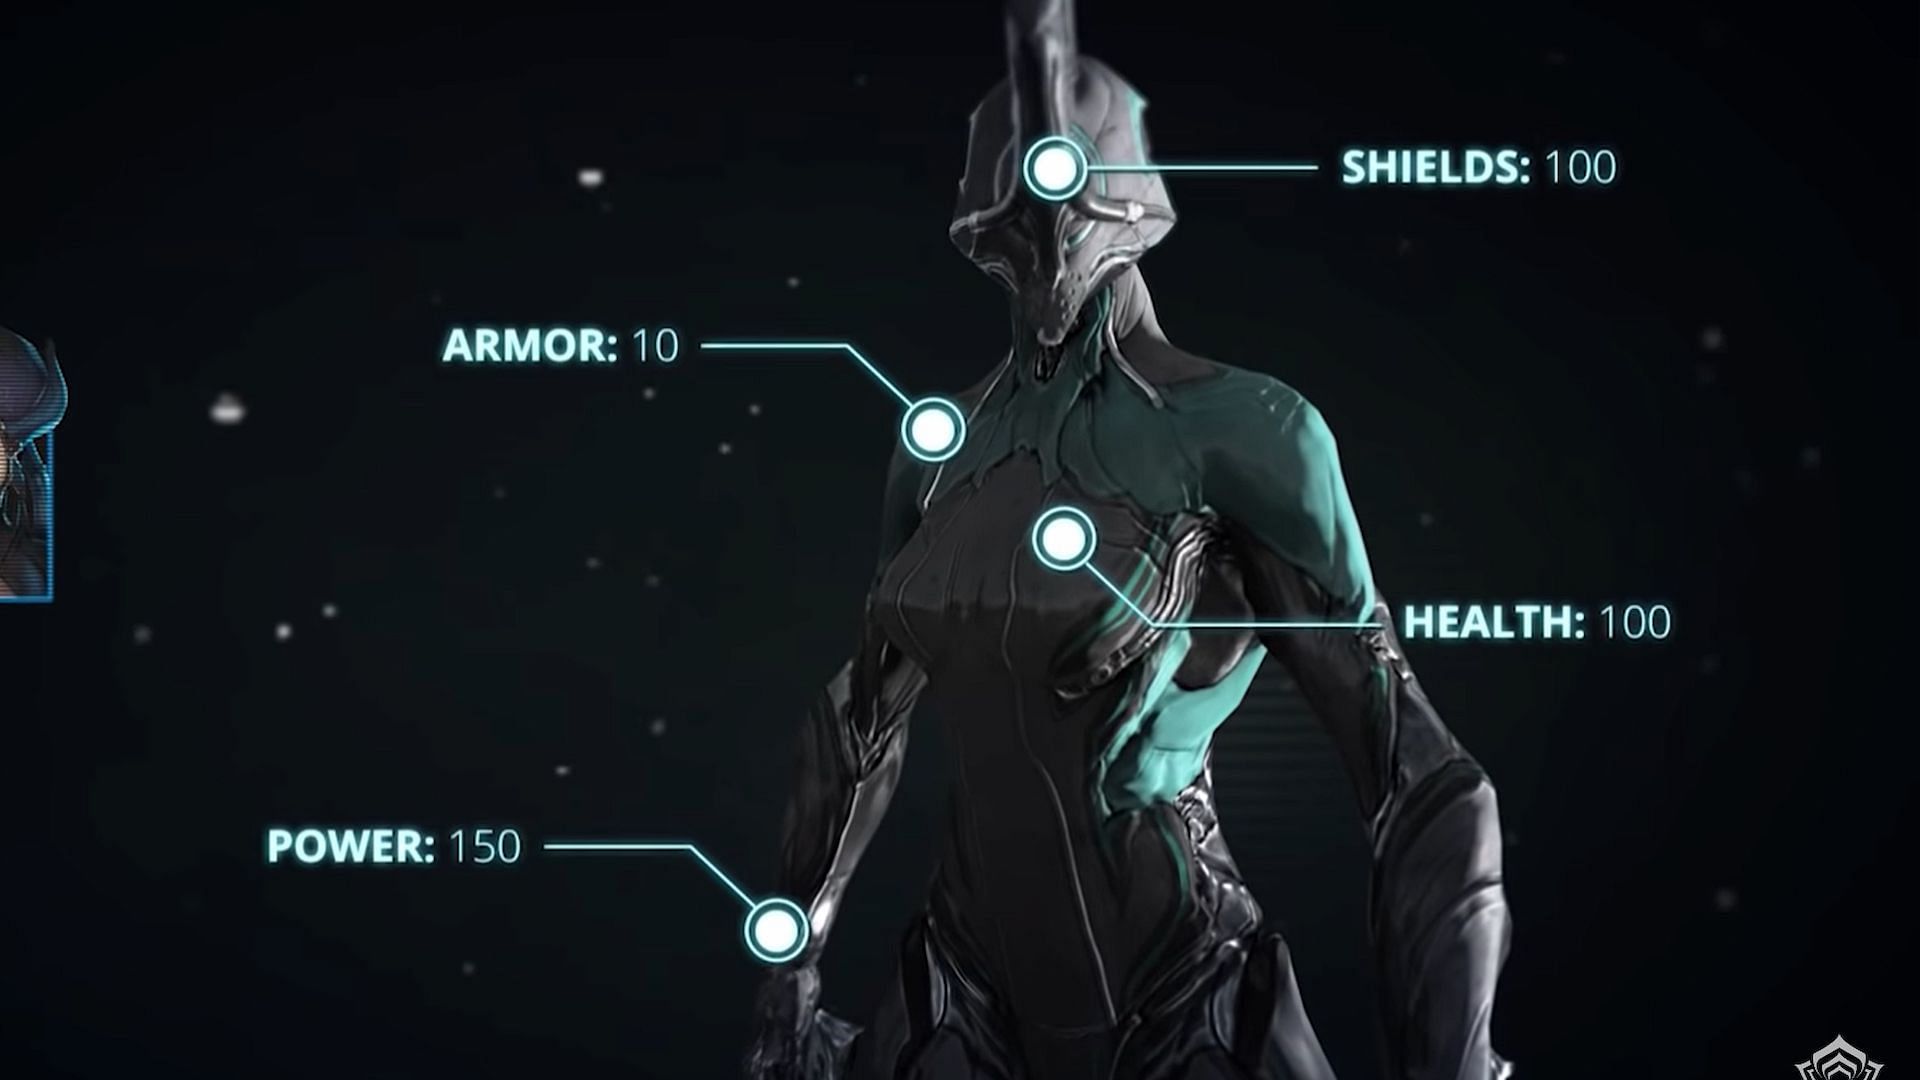 Nyx possesses psychic abilities (Image via Digital Extremes)